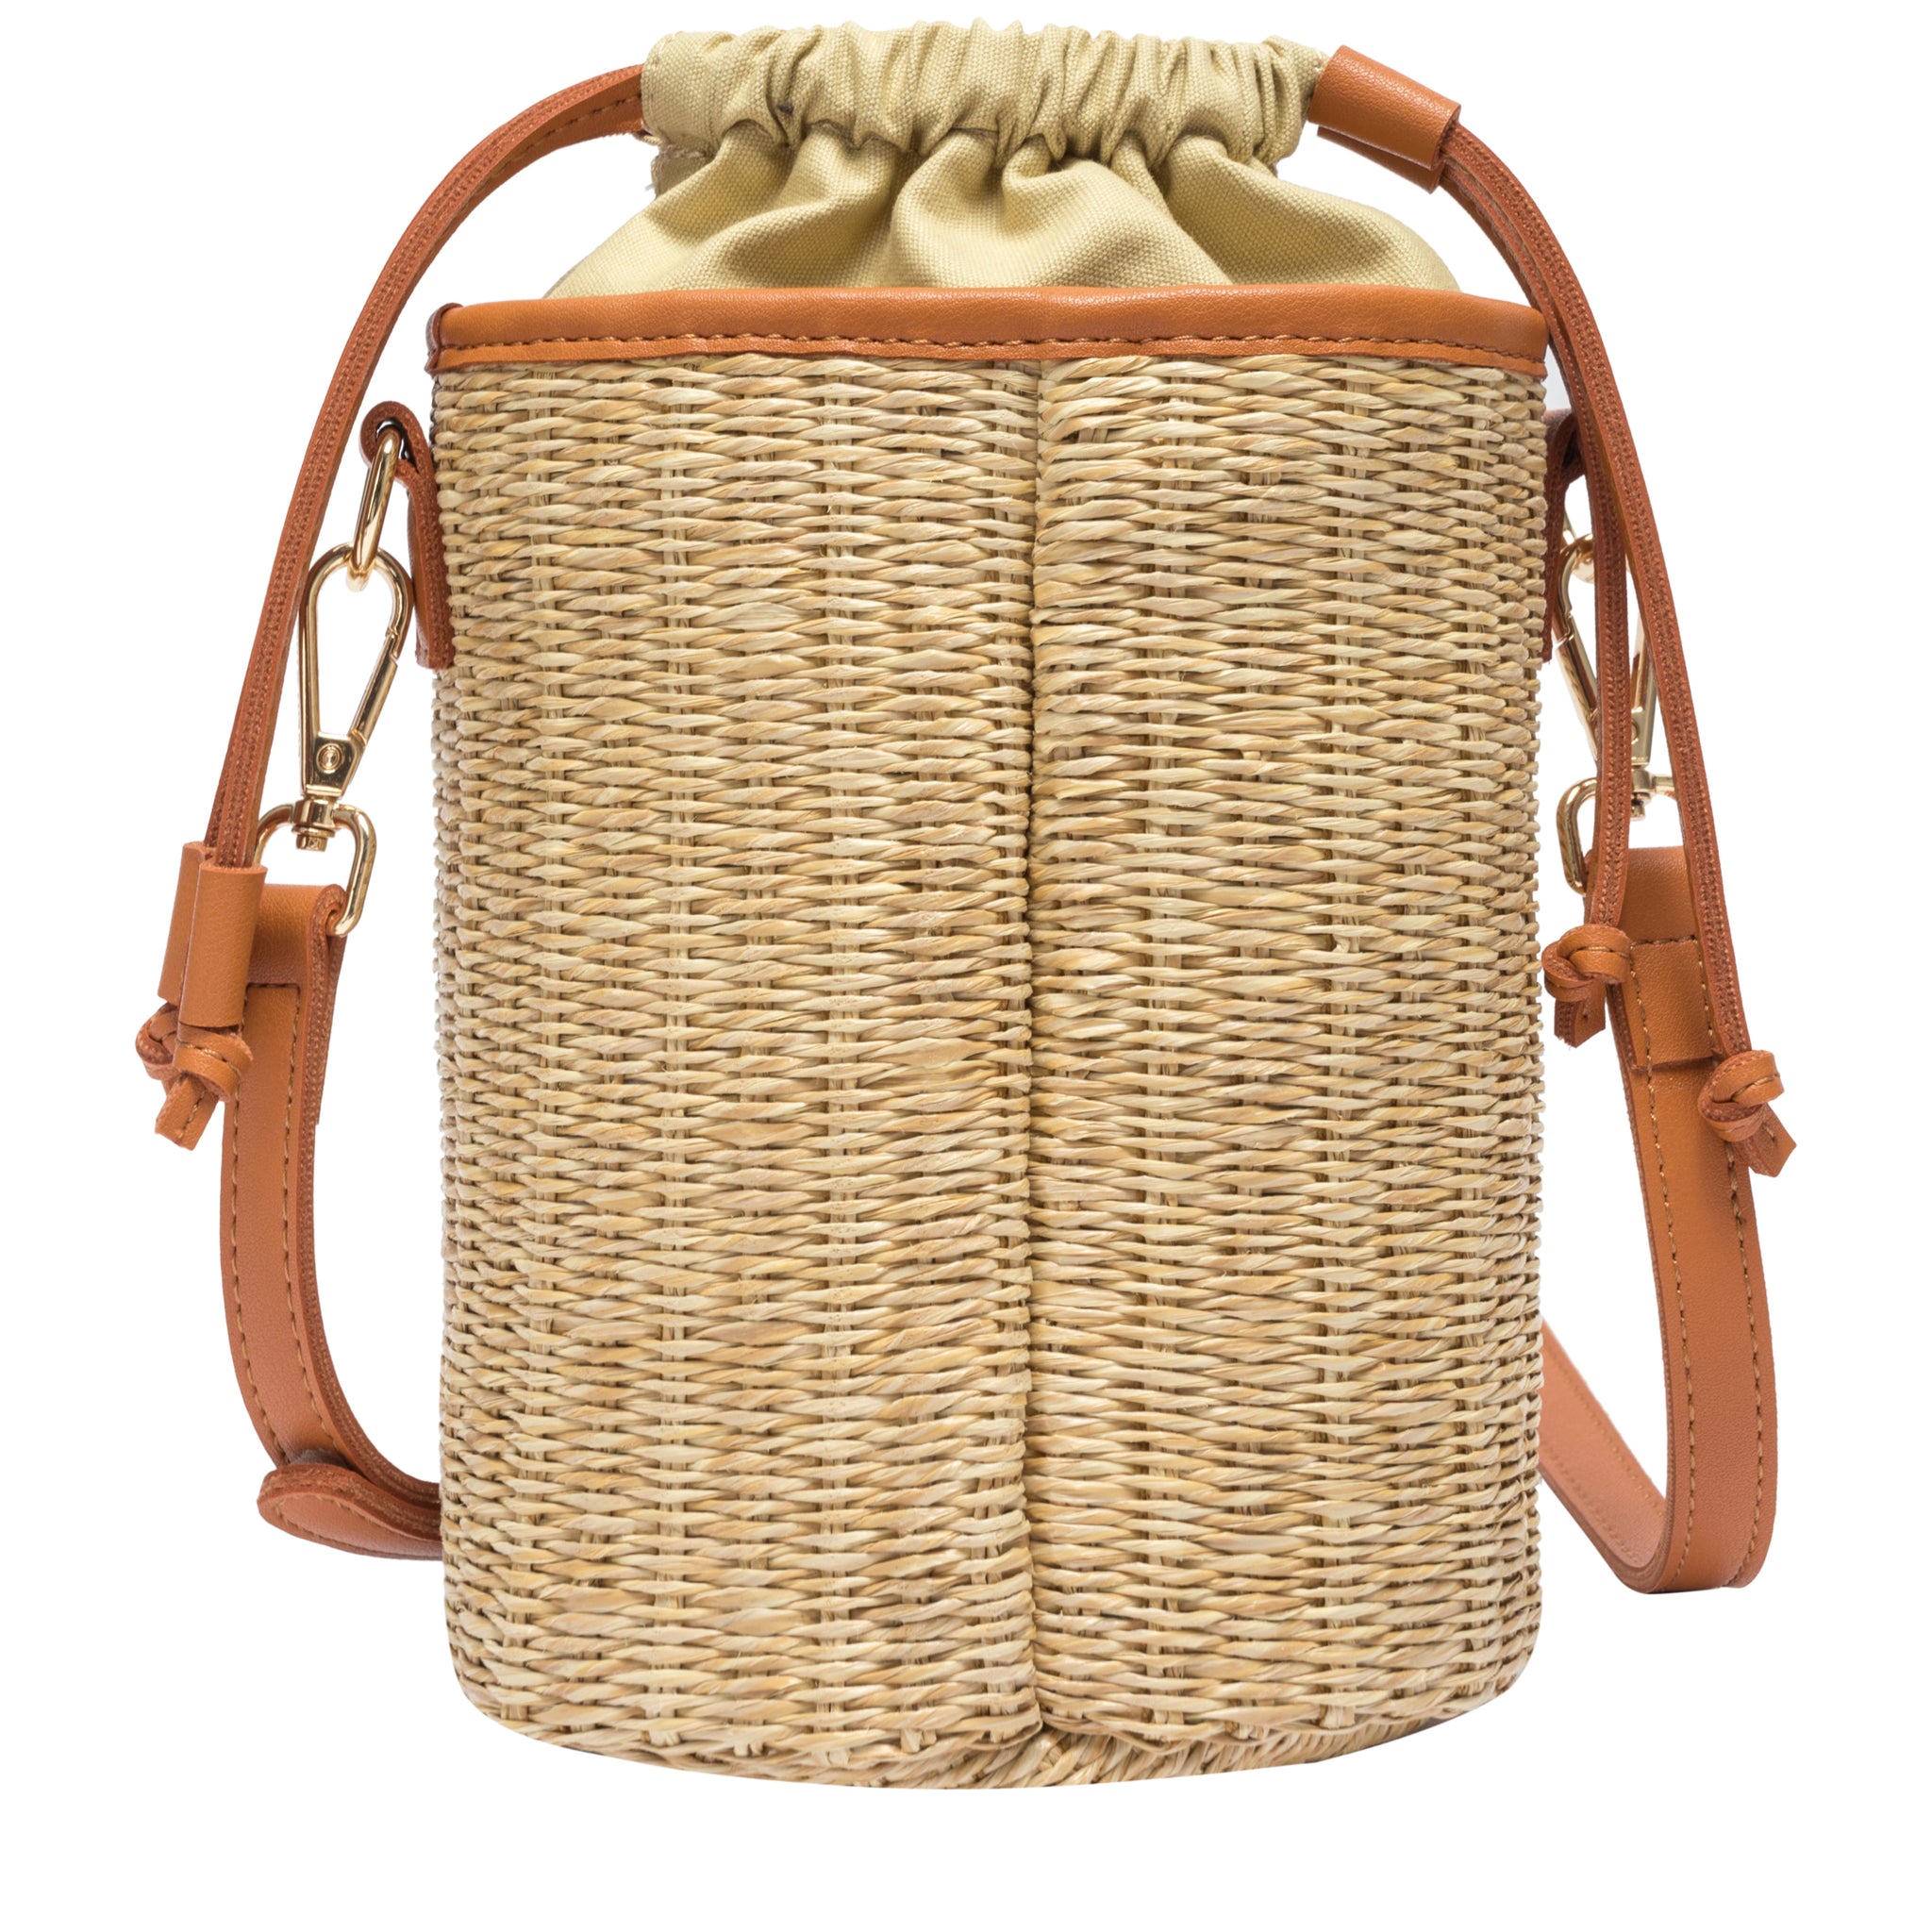 Every Other - Cylindrical Drawstring bag - tan